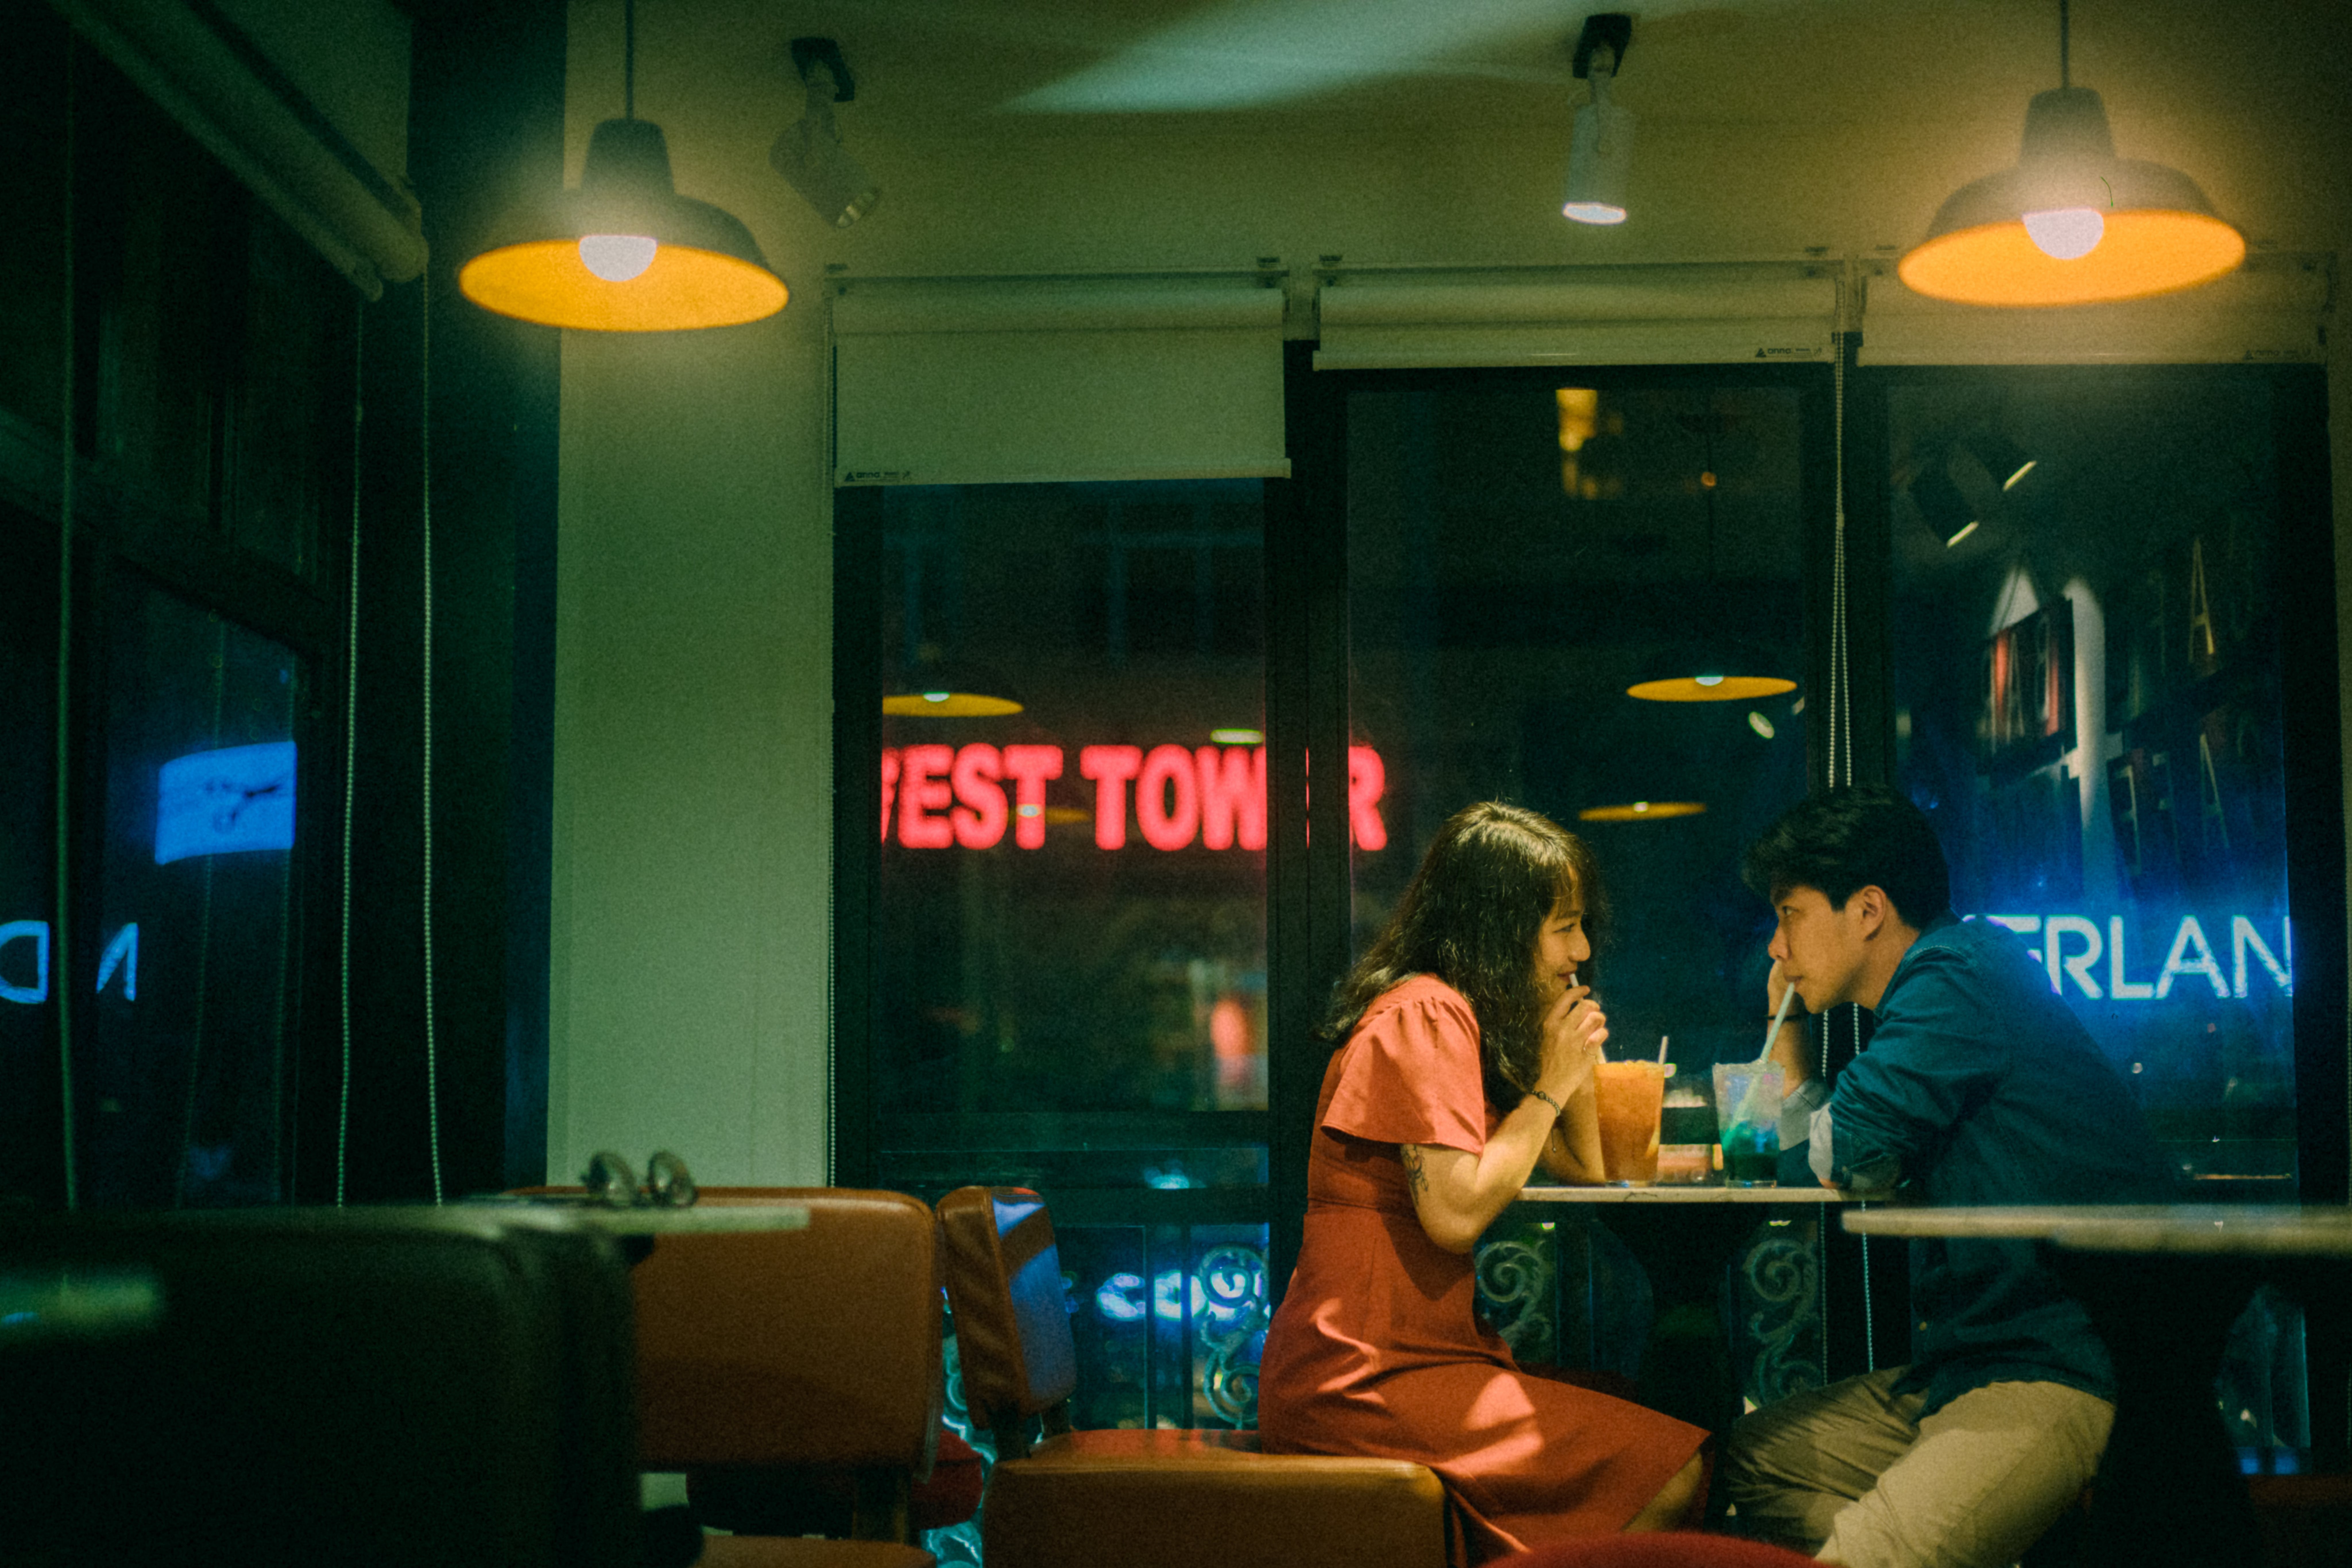 A couple on a date | Source: Pexels